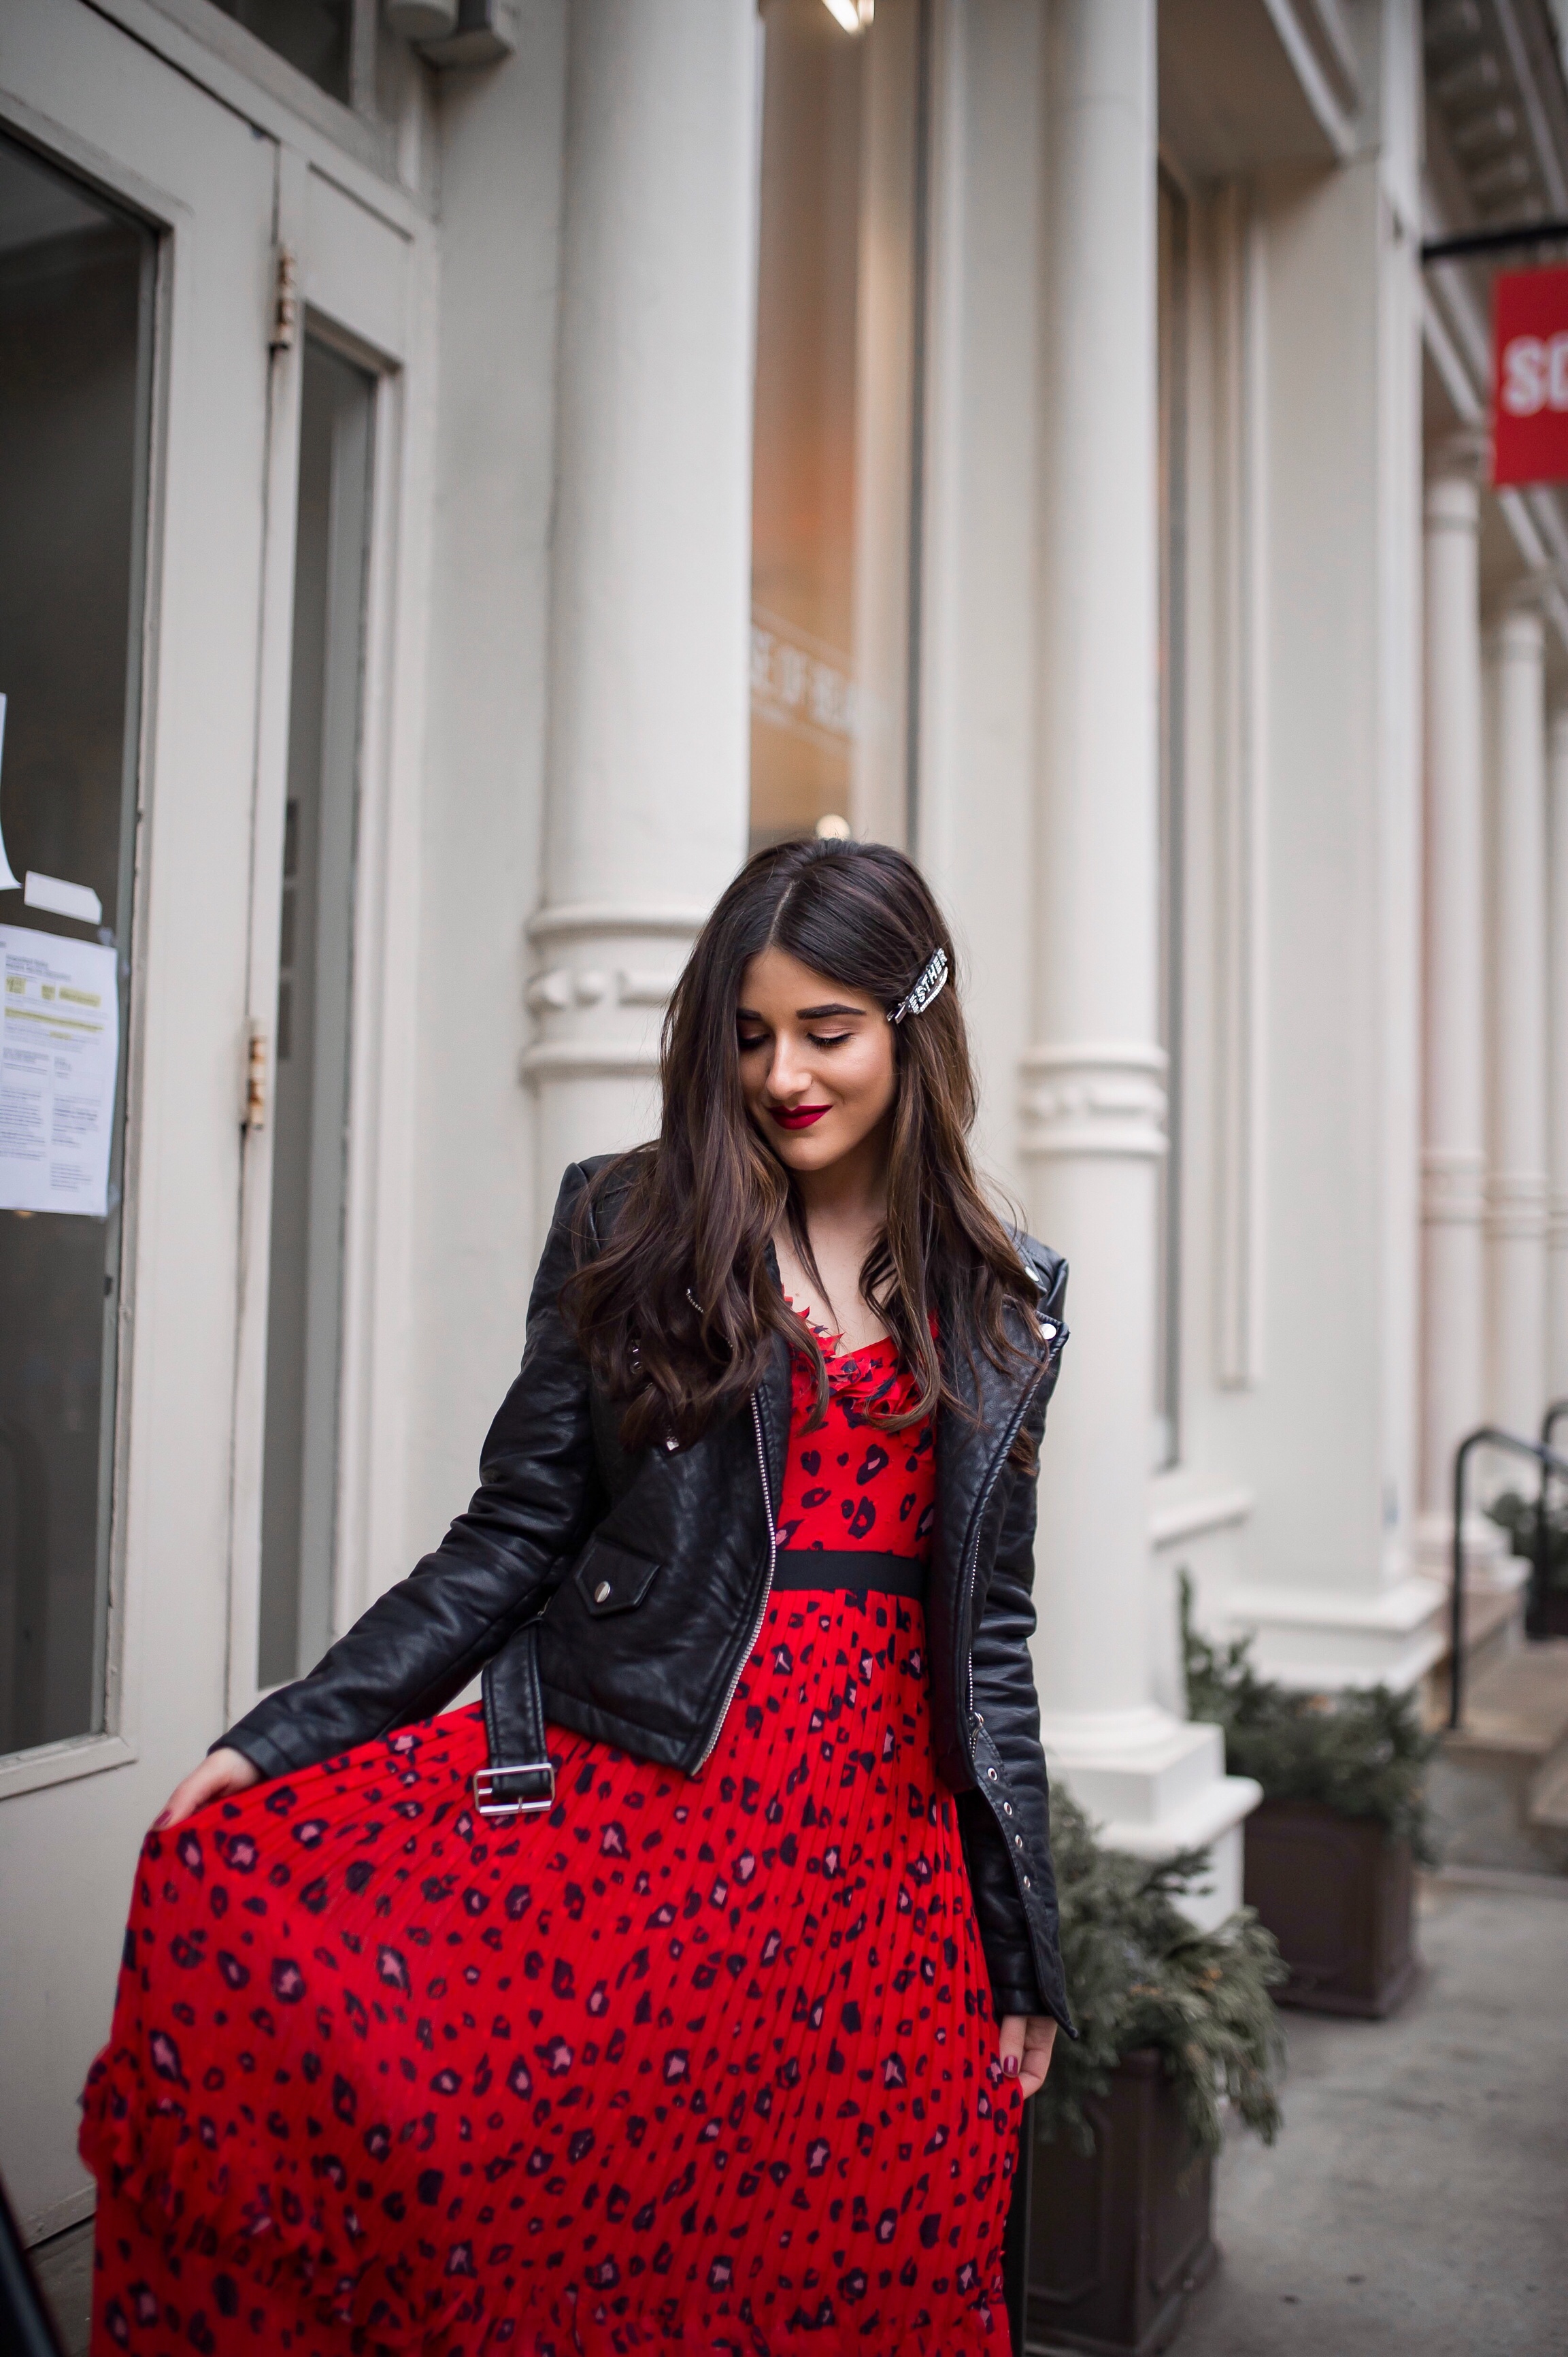 Why Do We Do Any Of This? Red Leopard Dress Moto Jacket Esther Santer Fashion Blog NYC Street Style Blogger Outfit OOTD Trendy Shopping Girl What How To Wear Brunette Long Hairstyle Hair Accesories Monogrammed Jeweled Clips Nolabel Black Heels ASOS .JPG